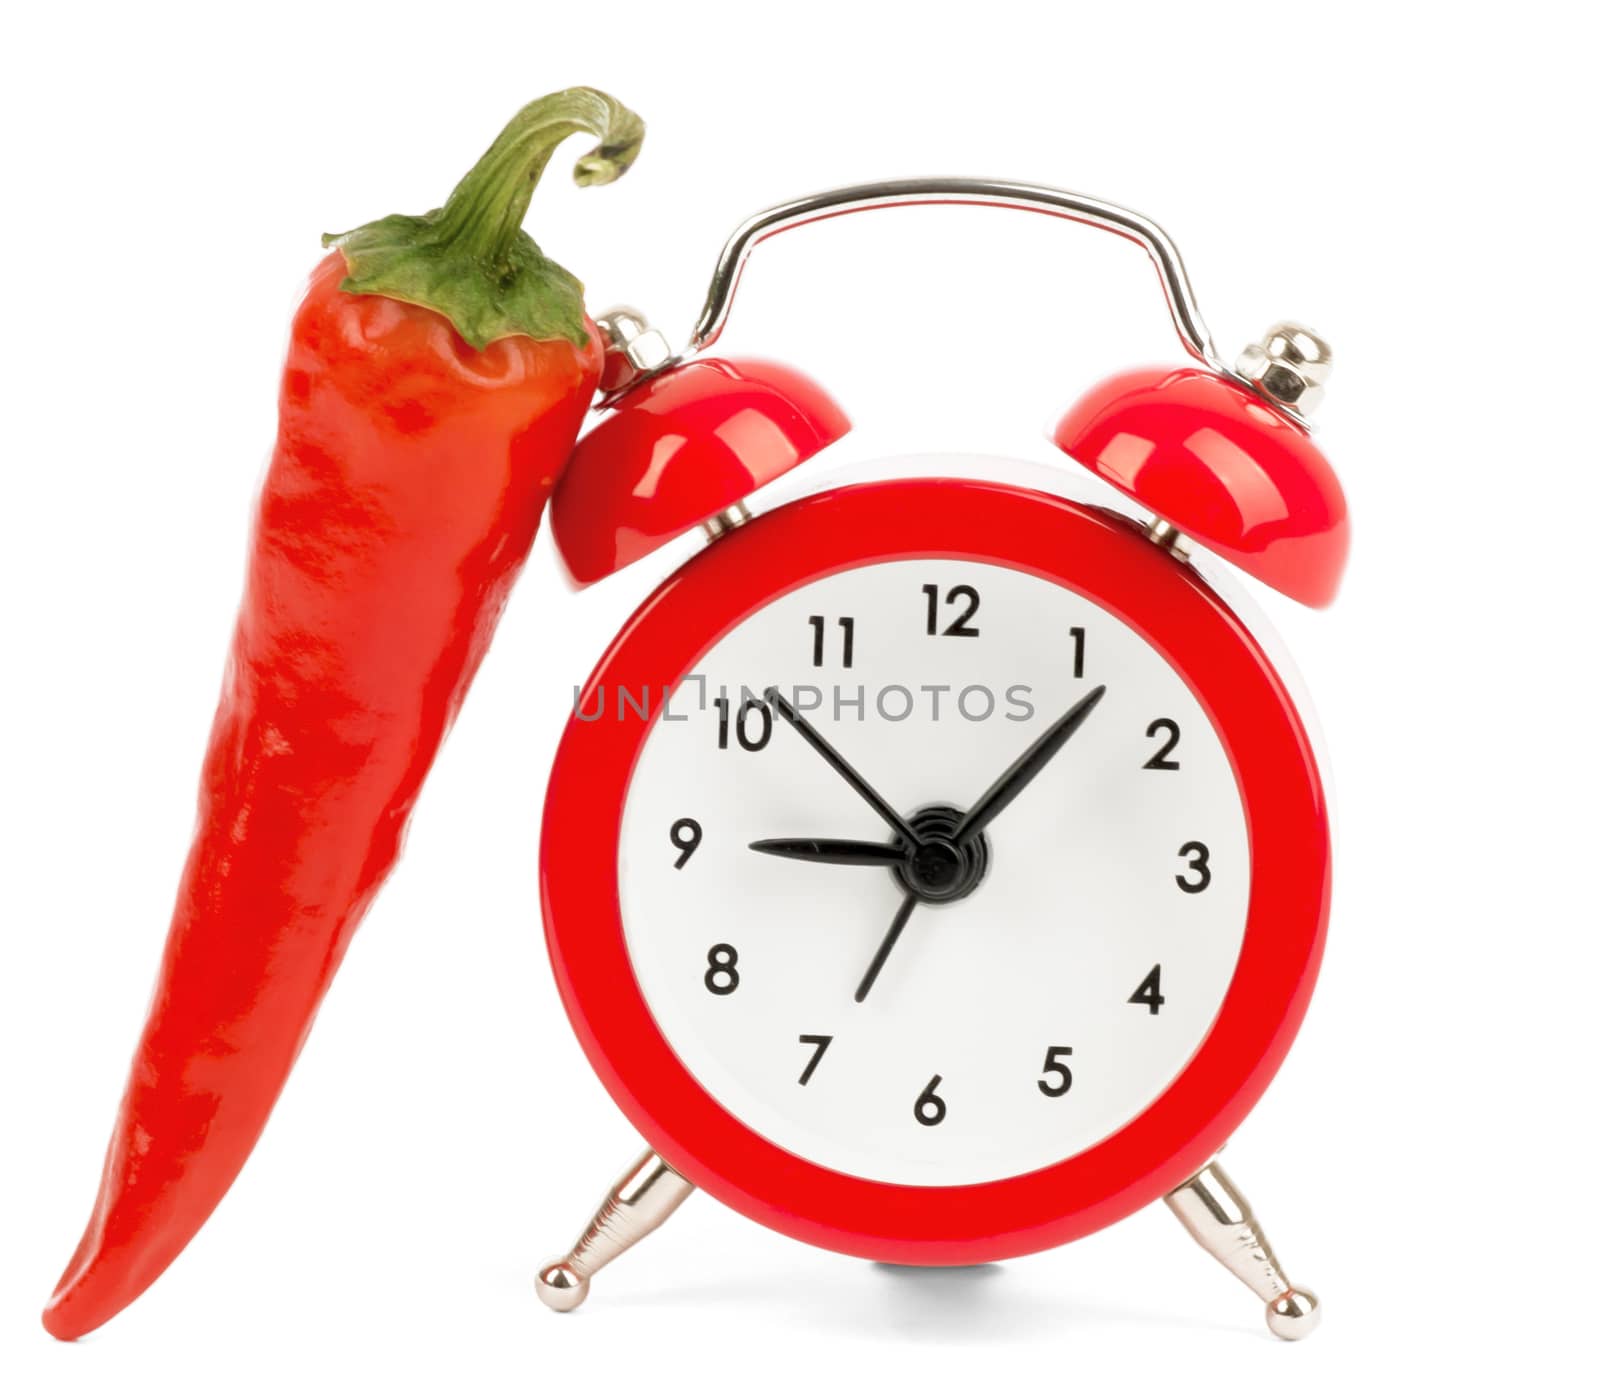 Red hot pepper with alarm clock by cherezoff